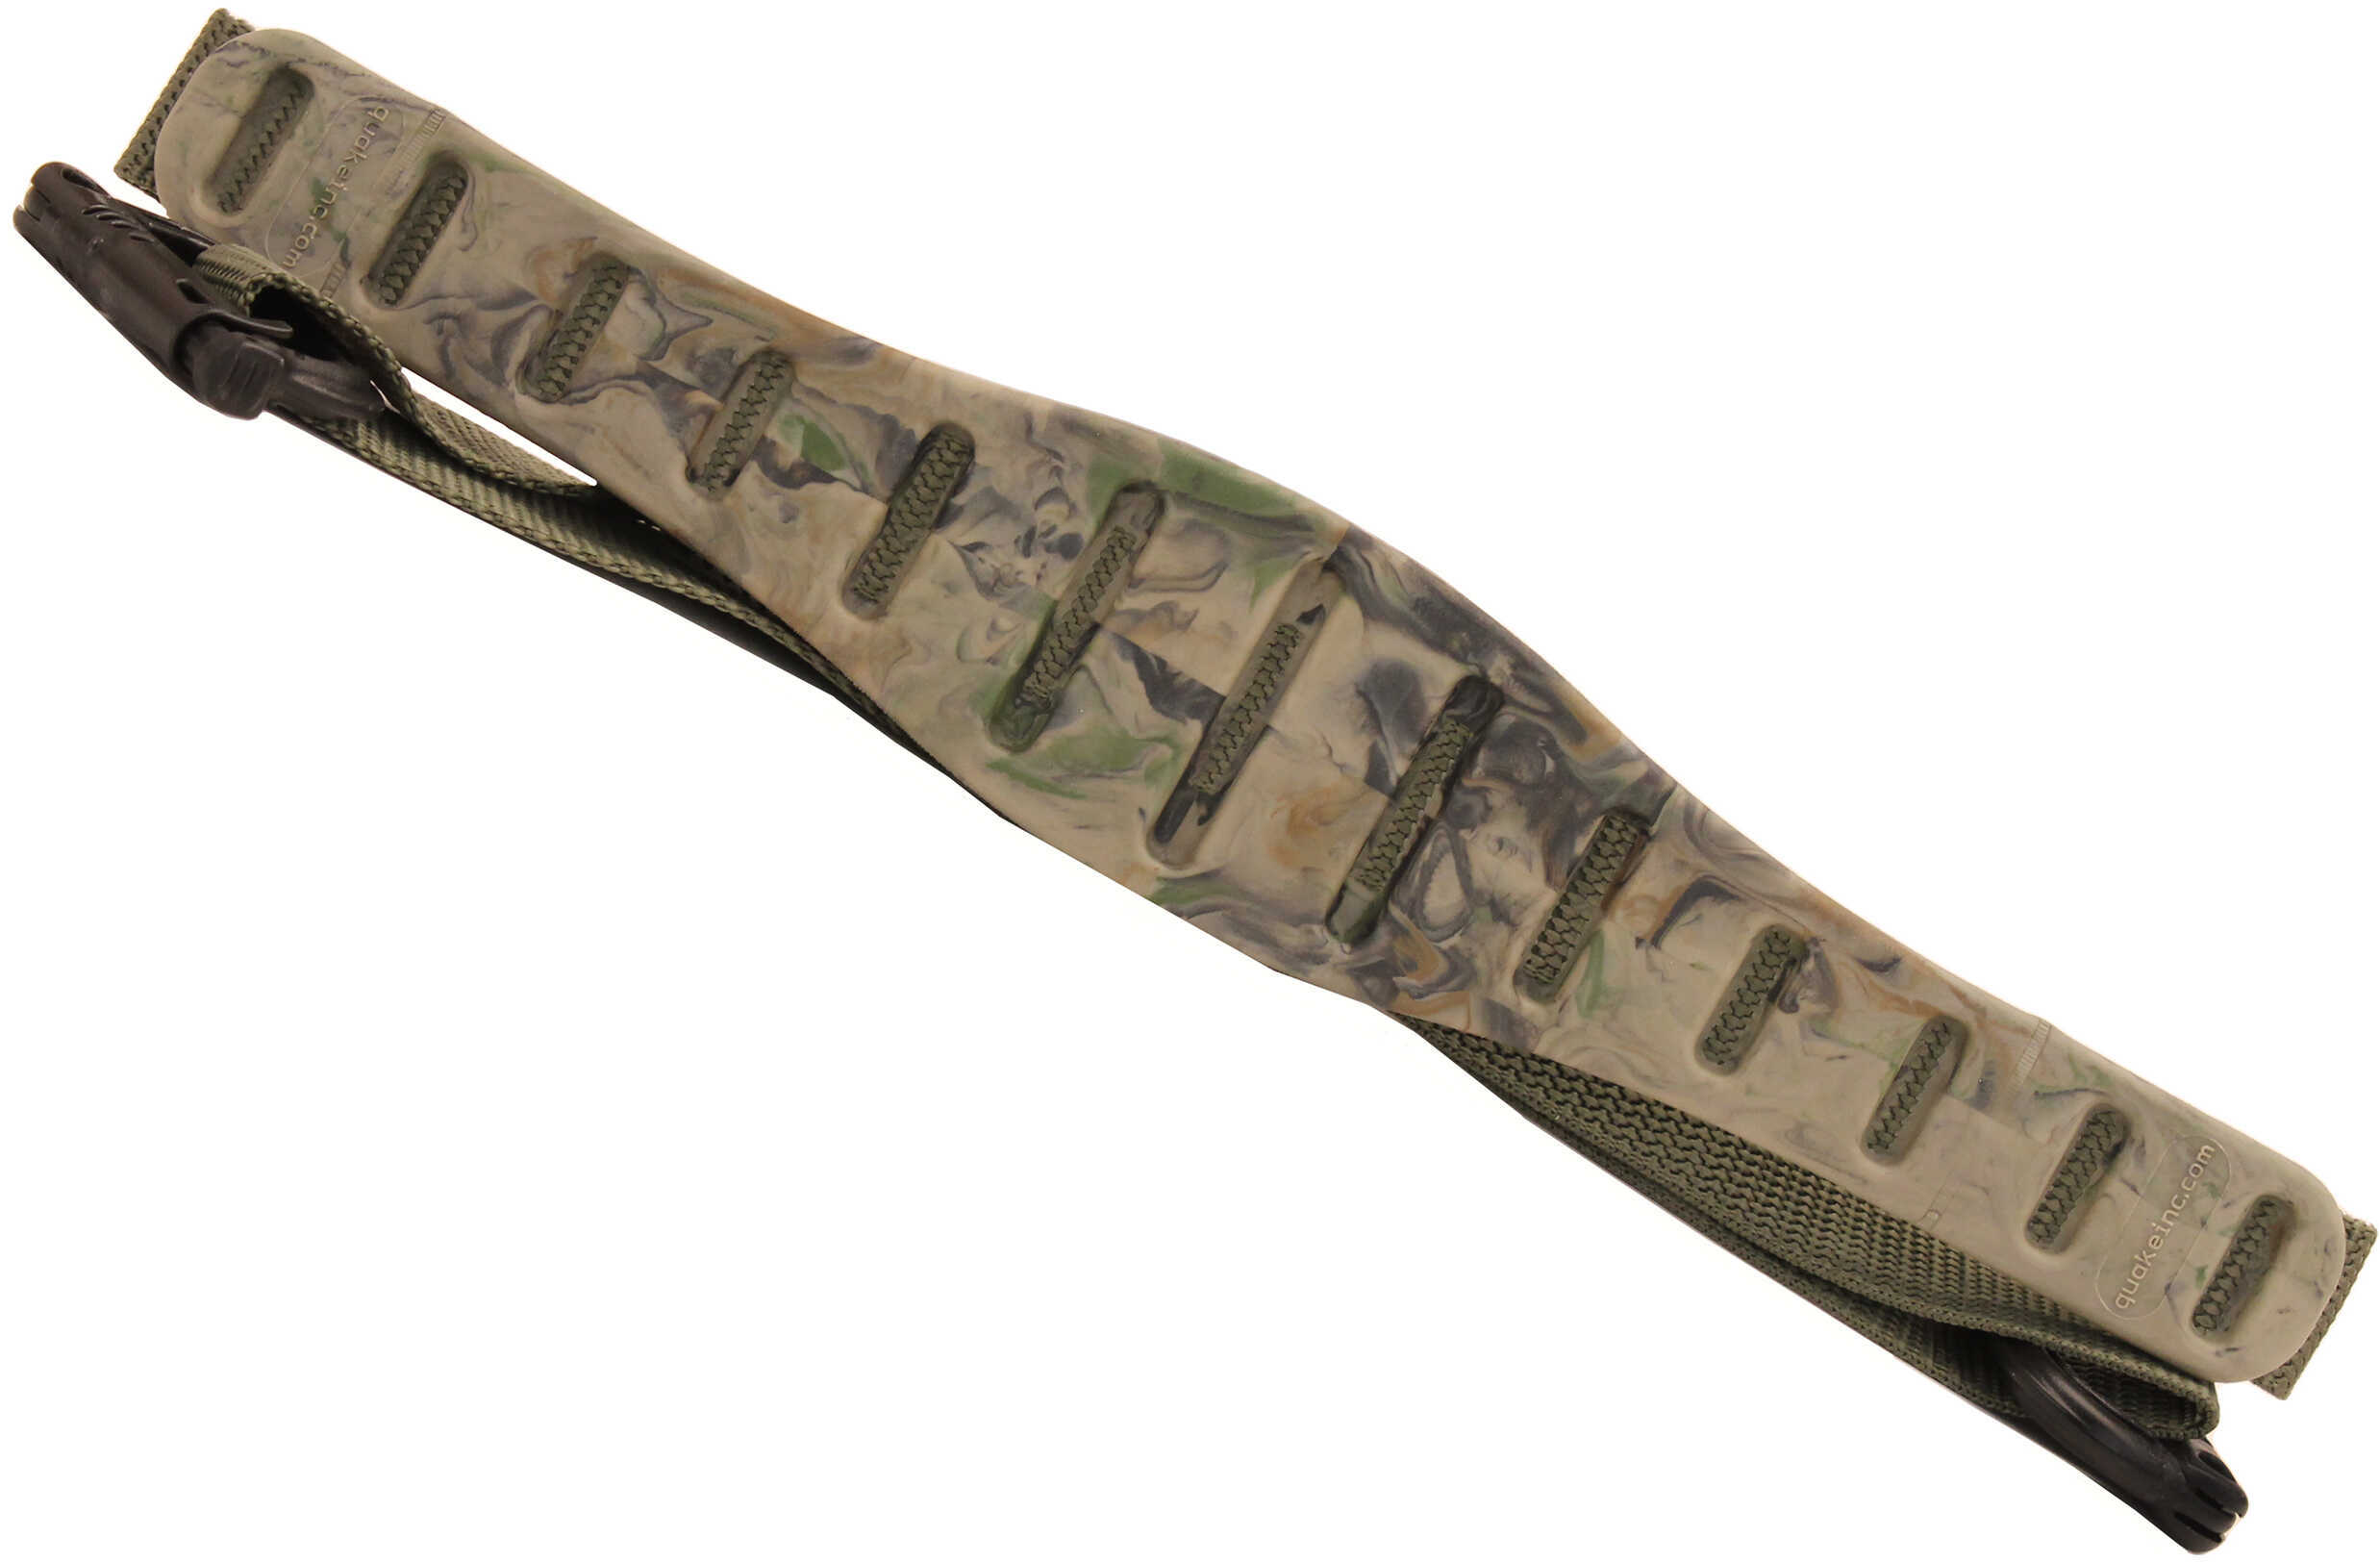 Quake Claw Ultimate Bow Sling OD Green/Black Model: 60003-9